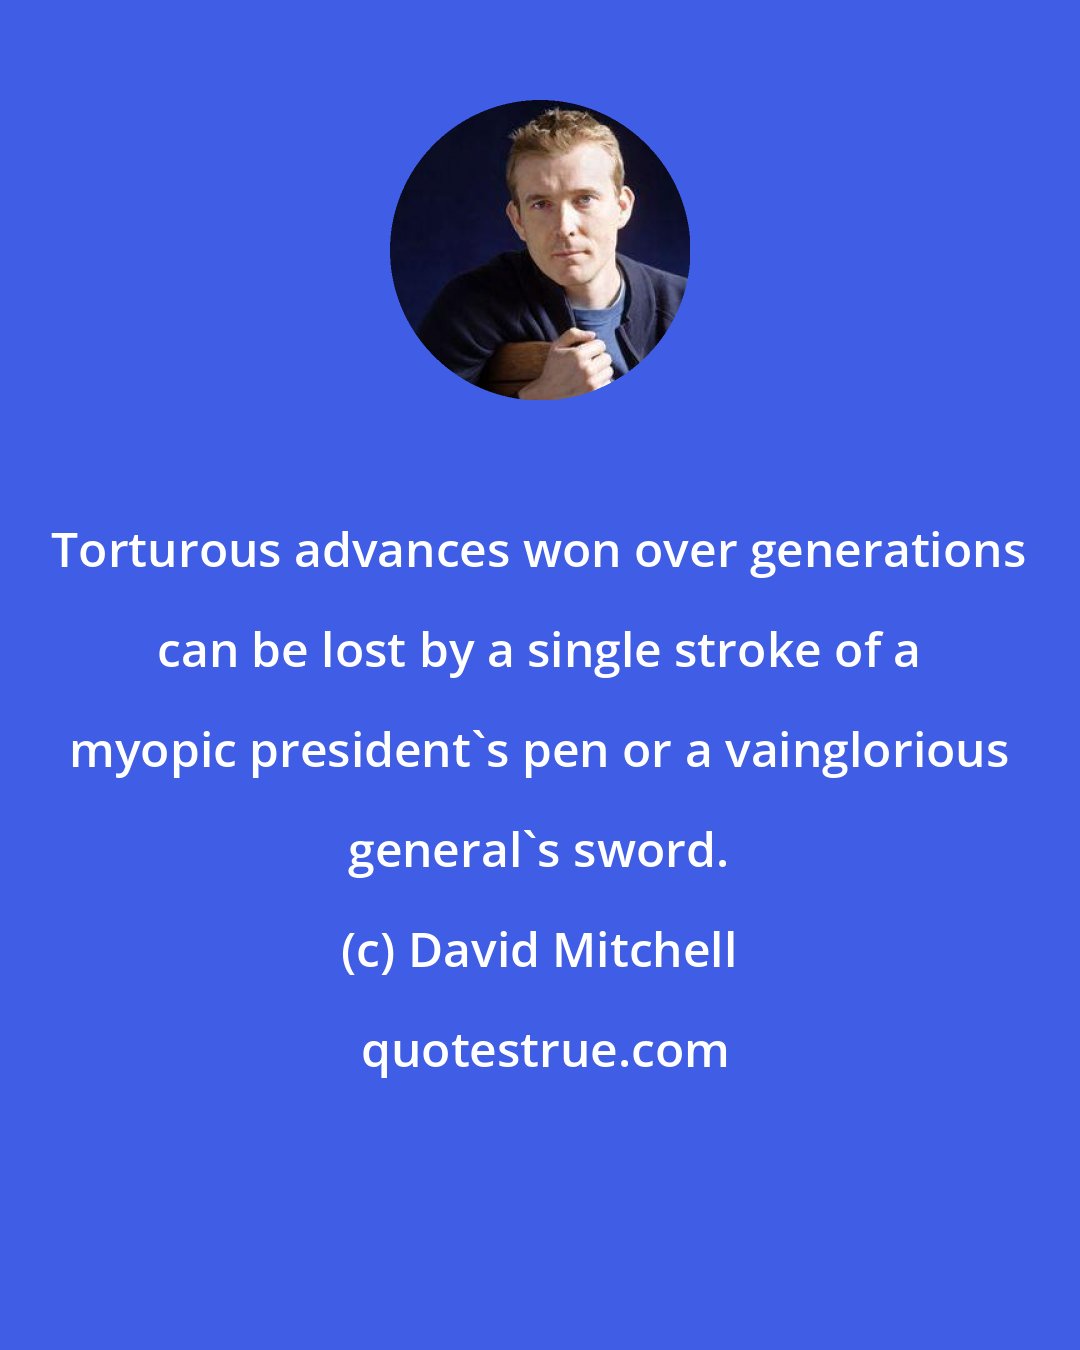 David Mitchell: Torturous advances won over generations can be lost by a single stroke of a myopic president's pen or a vainglorious general's sword.